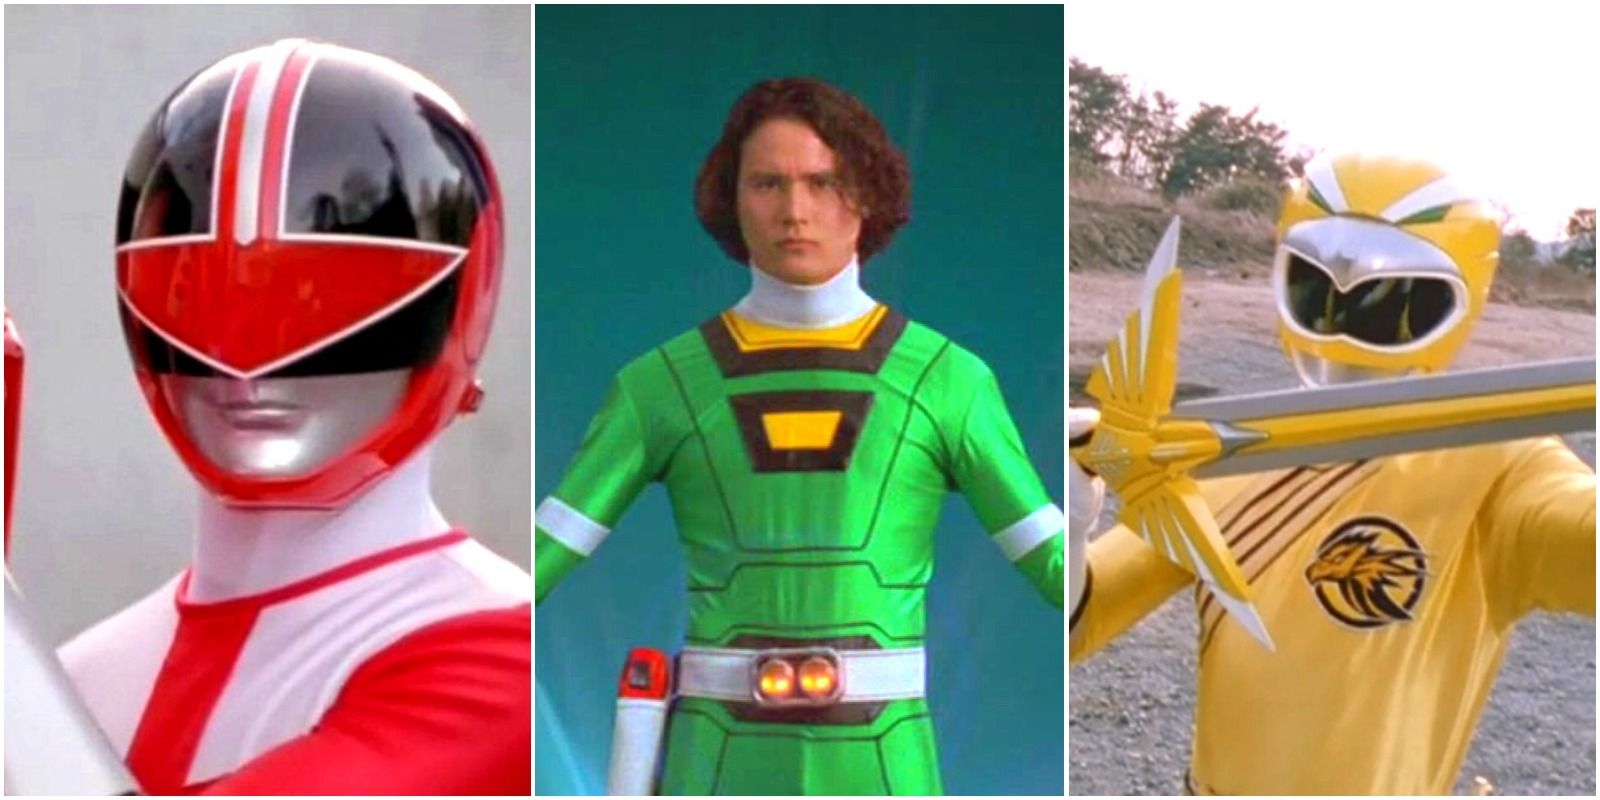 Red Time Force Ranger, Green Turbo Ranger, and Yellow Wild Force Ranger